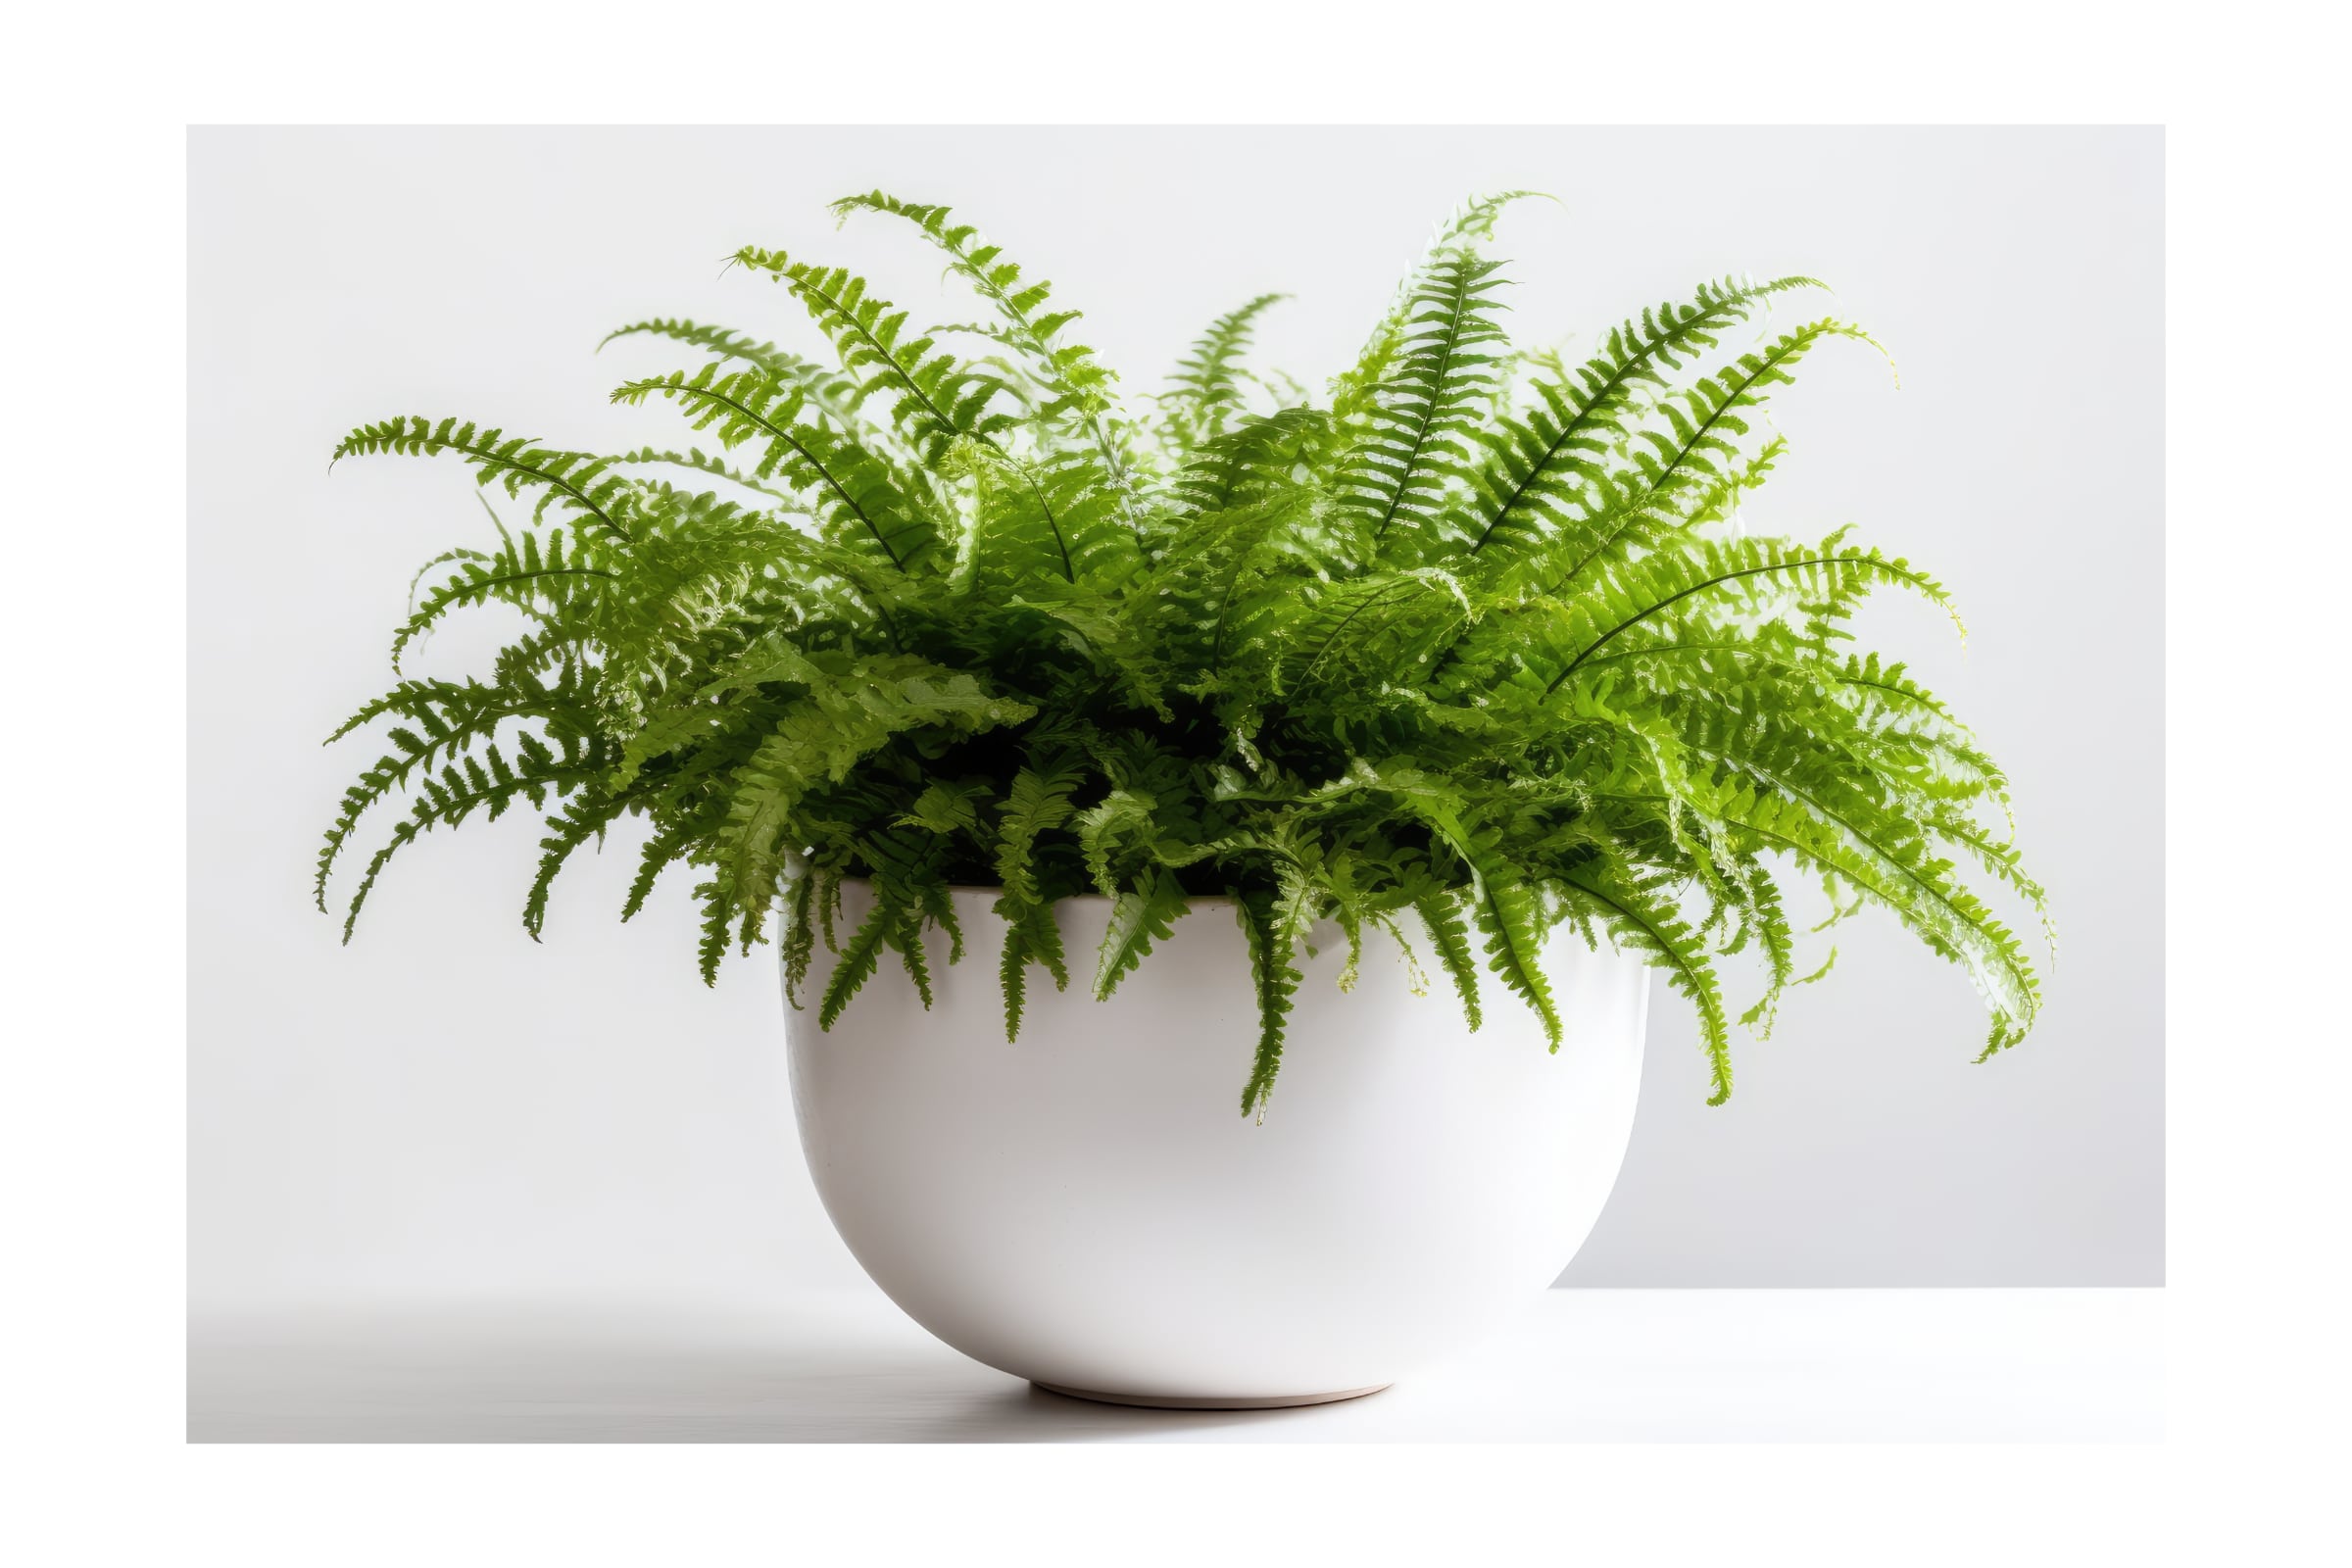 Fern-Tastic: The Wonders of Ferns in Your Home - Leaf Culture